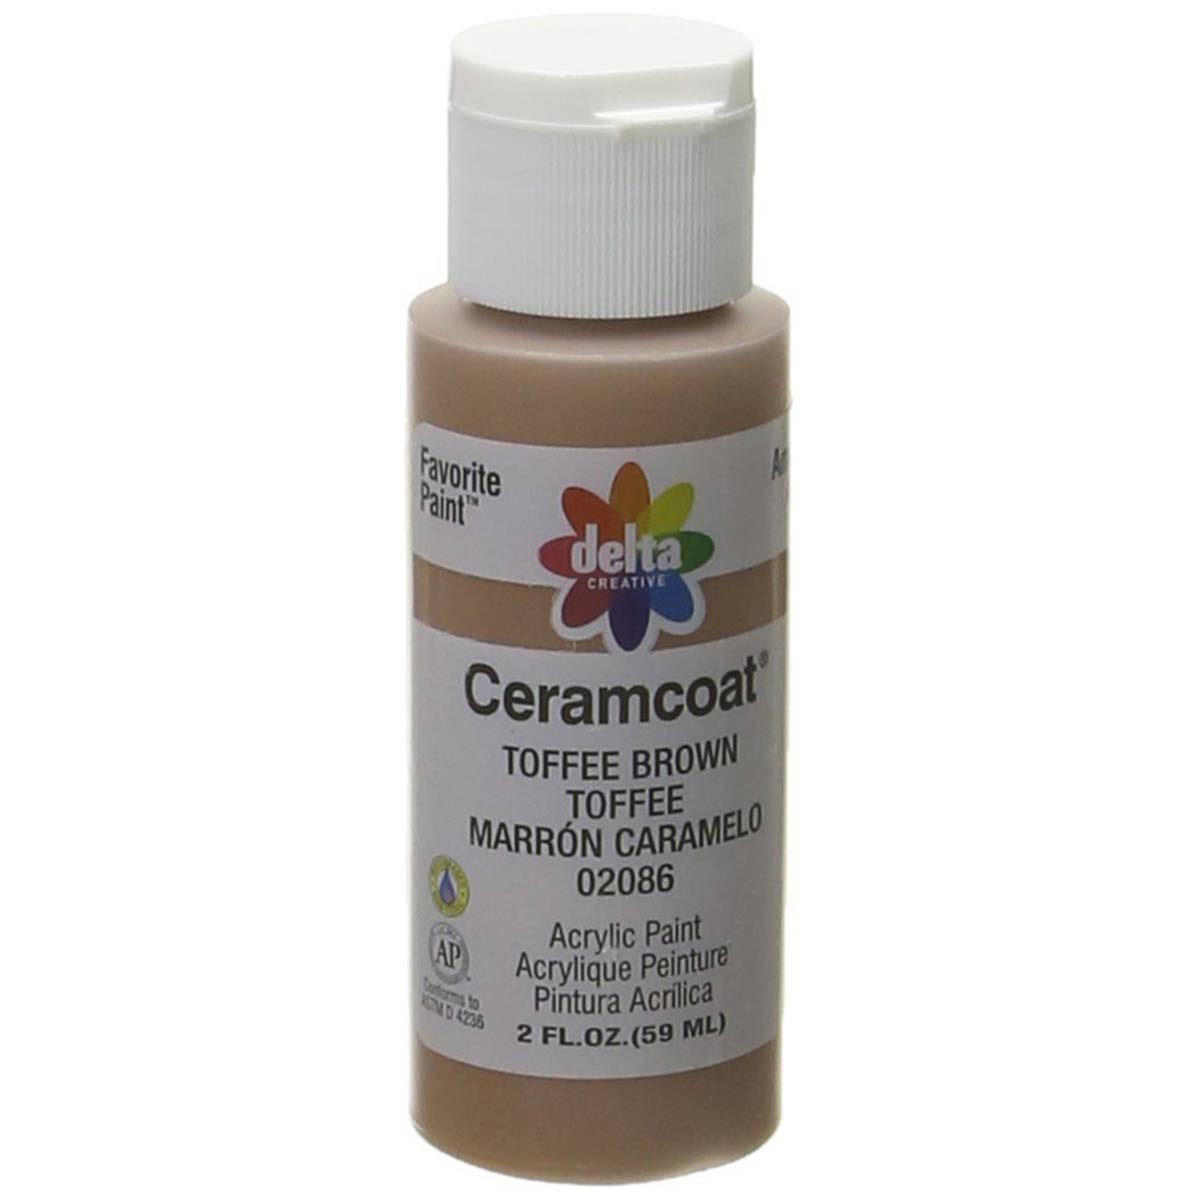 Delta Ceramcoat Acrylic Paint - Toffee Brown, 2 oz. - 020860202W